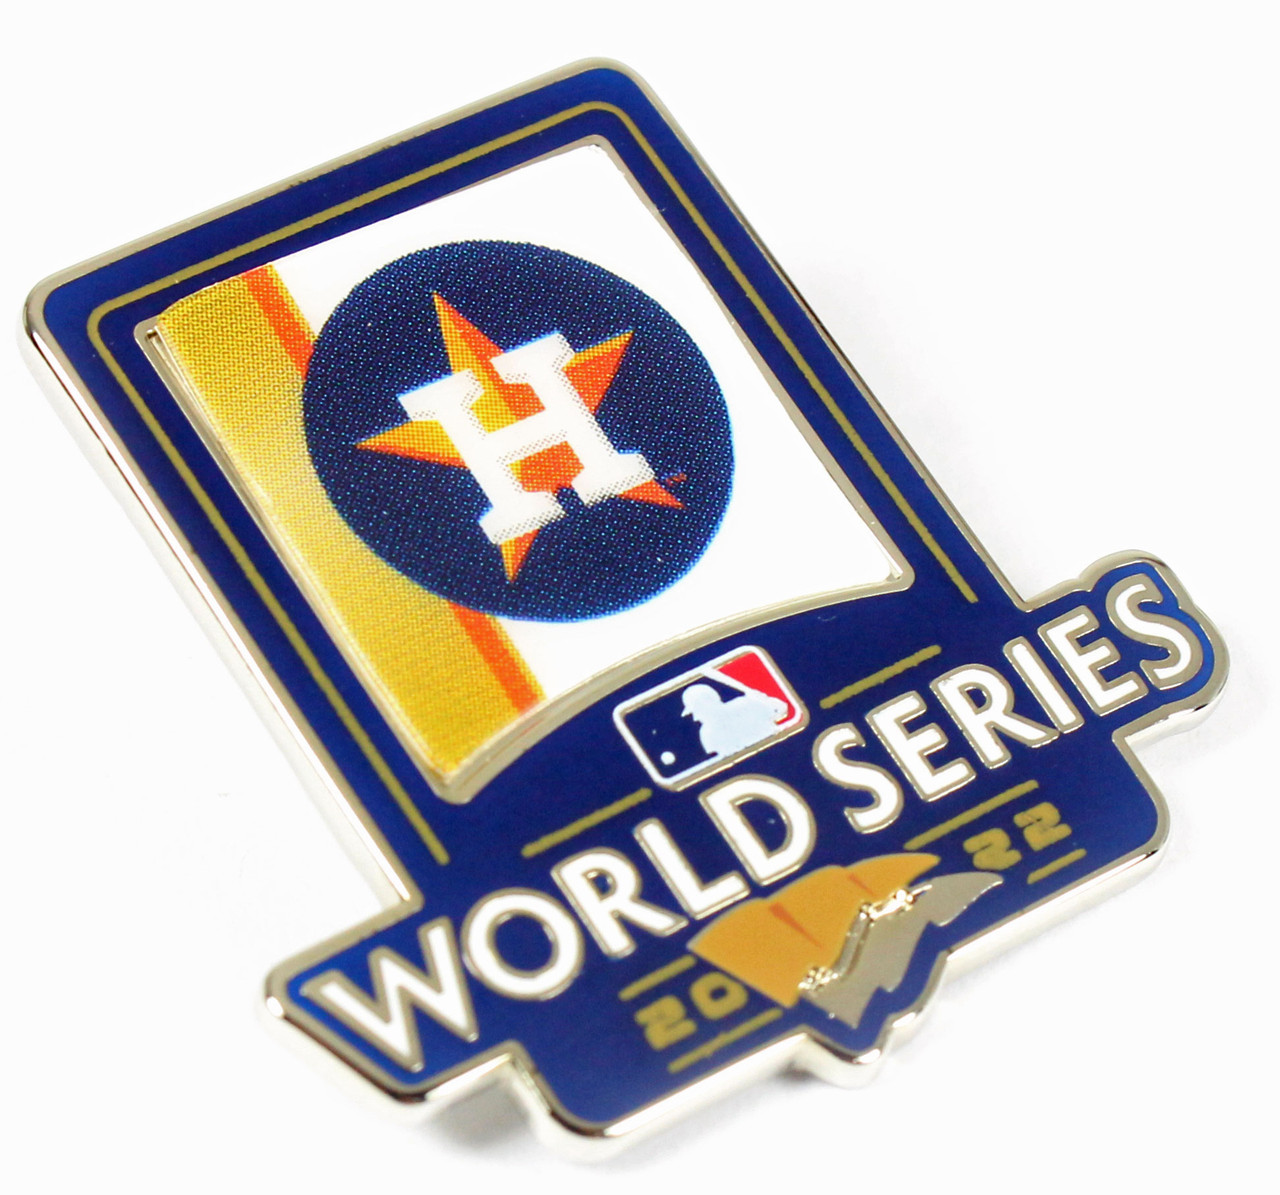 Official Houston Astros Collectible Patches, Pins, Astros Patches, Pin Sets